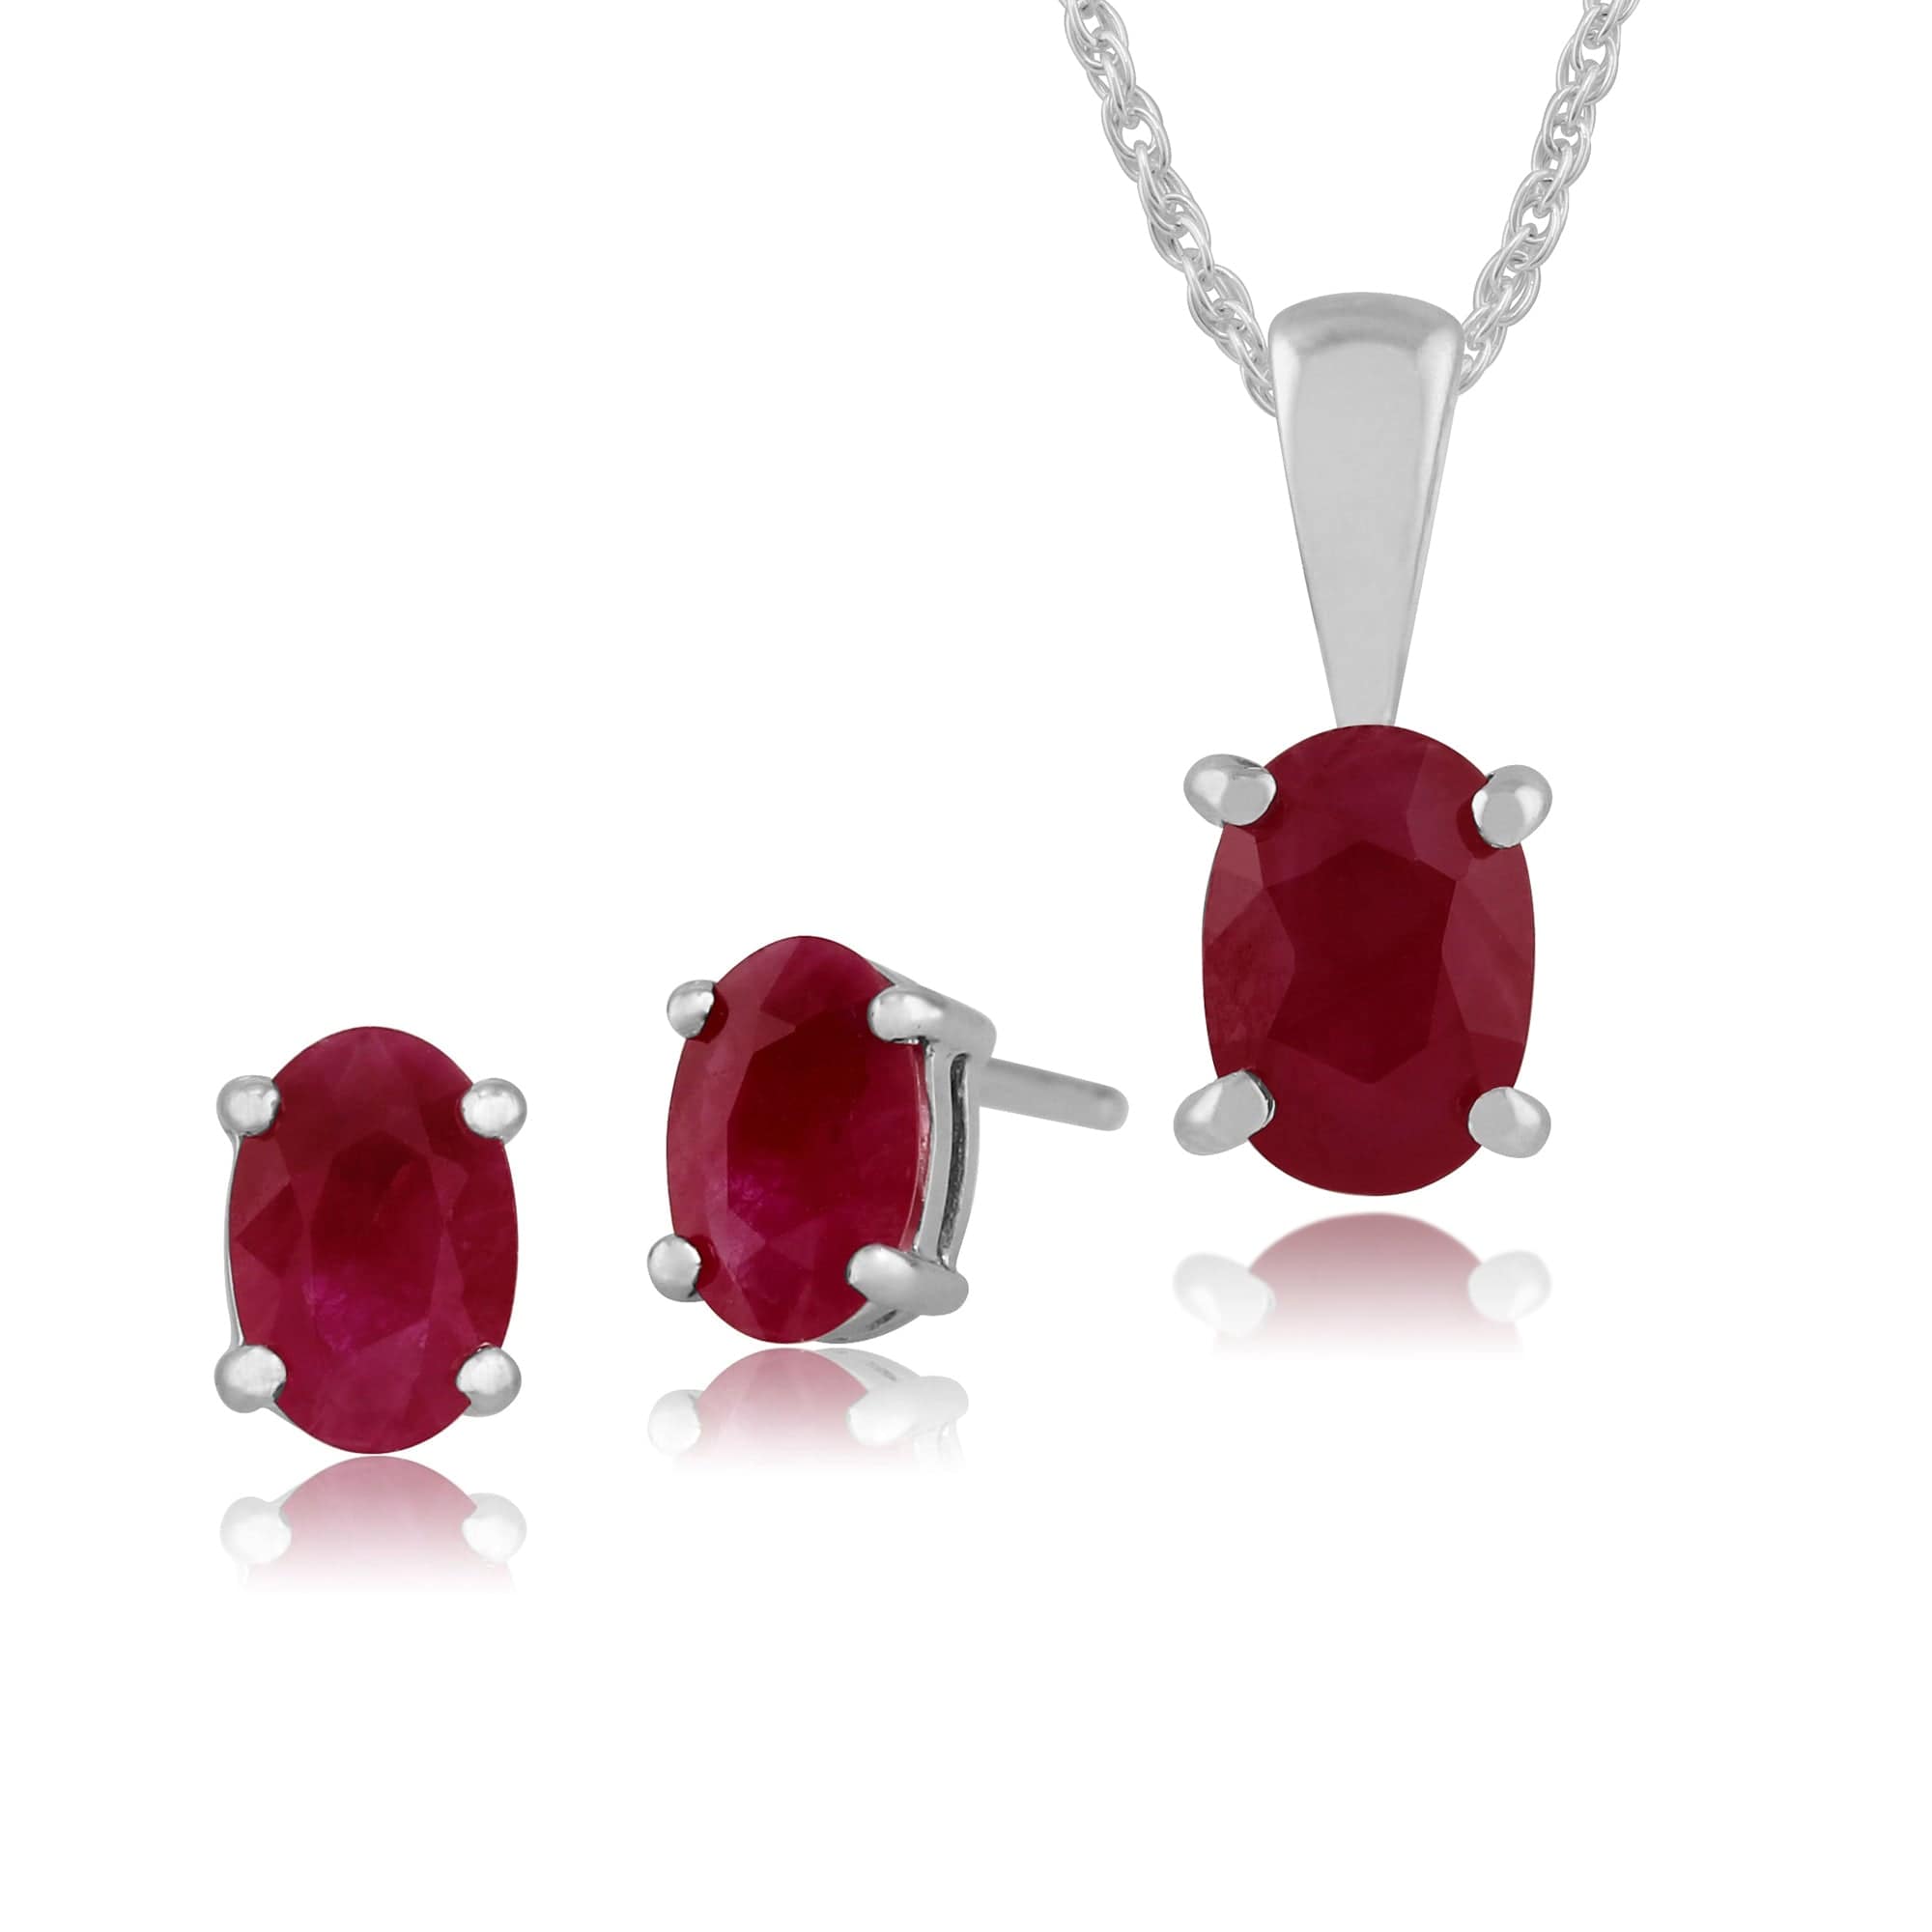 117E0017069-117P0013079 Classic Oval Ruby Single Stone Stud Earrings & Pendant Set in 9ct White Gold 1